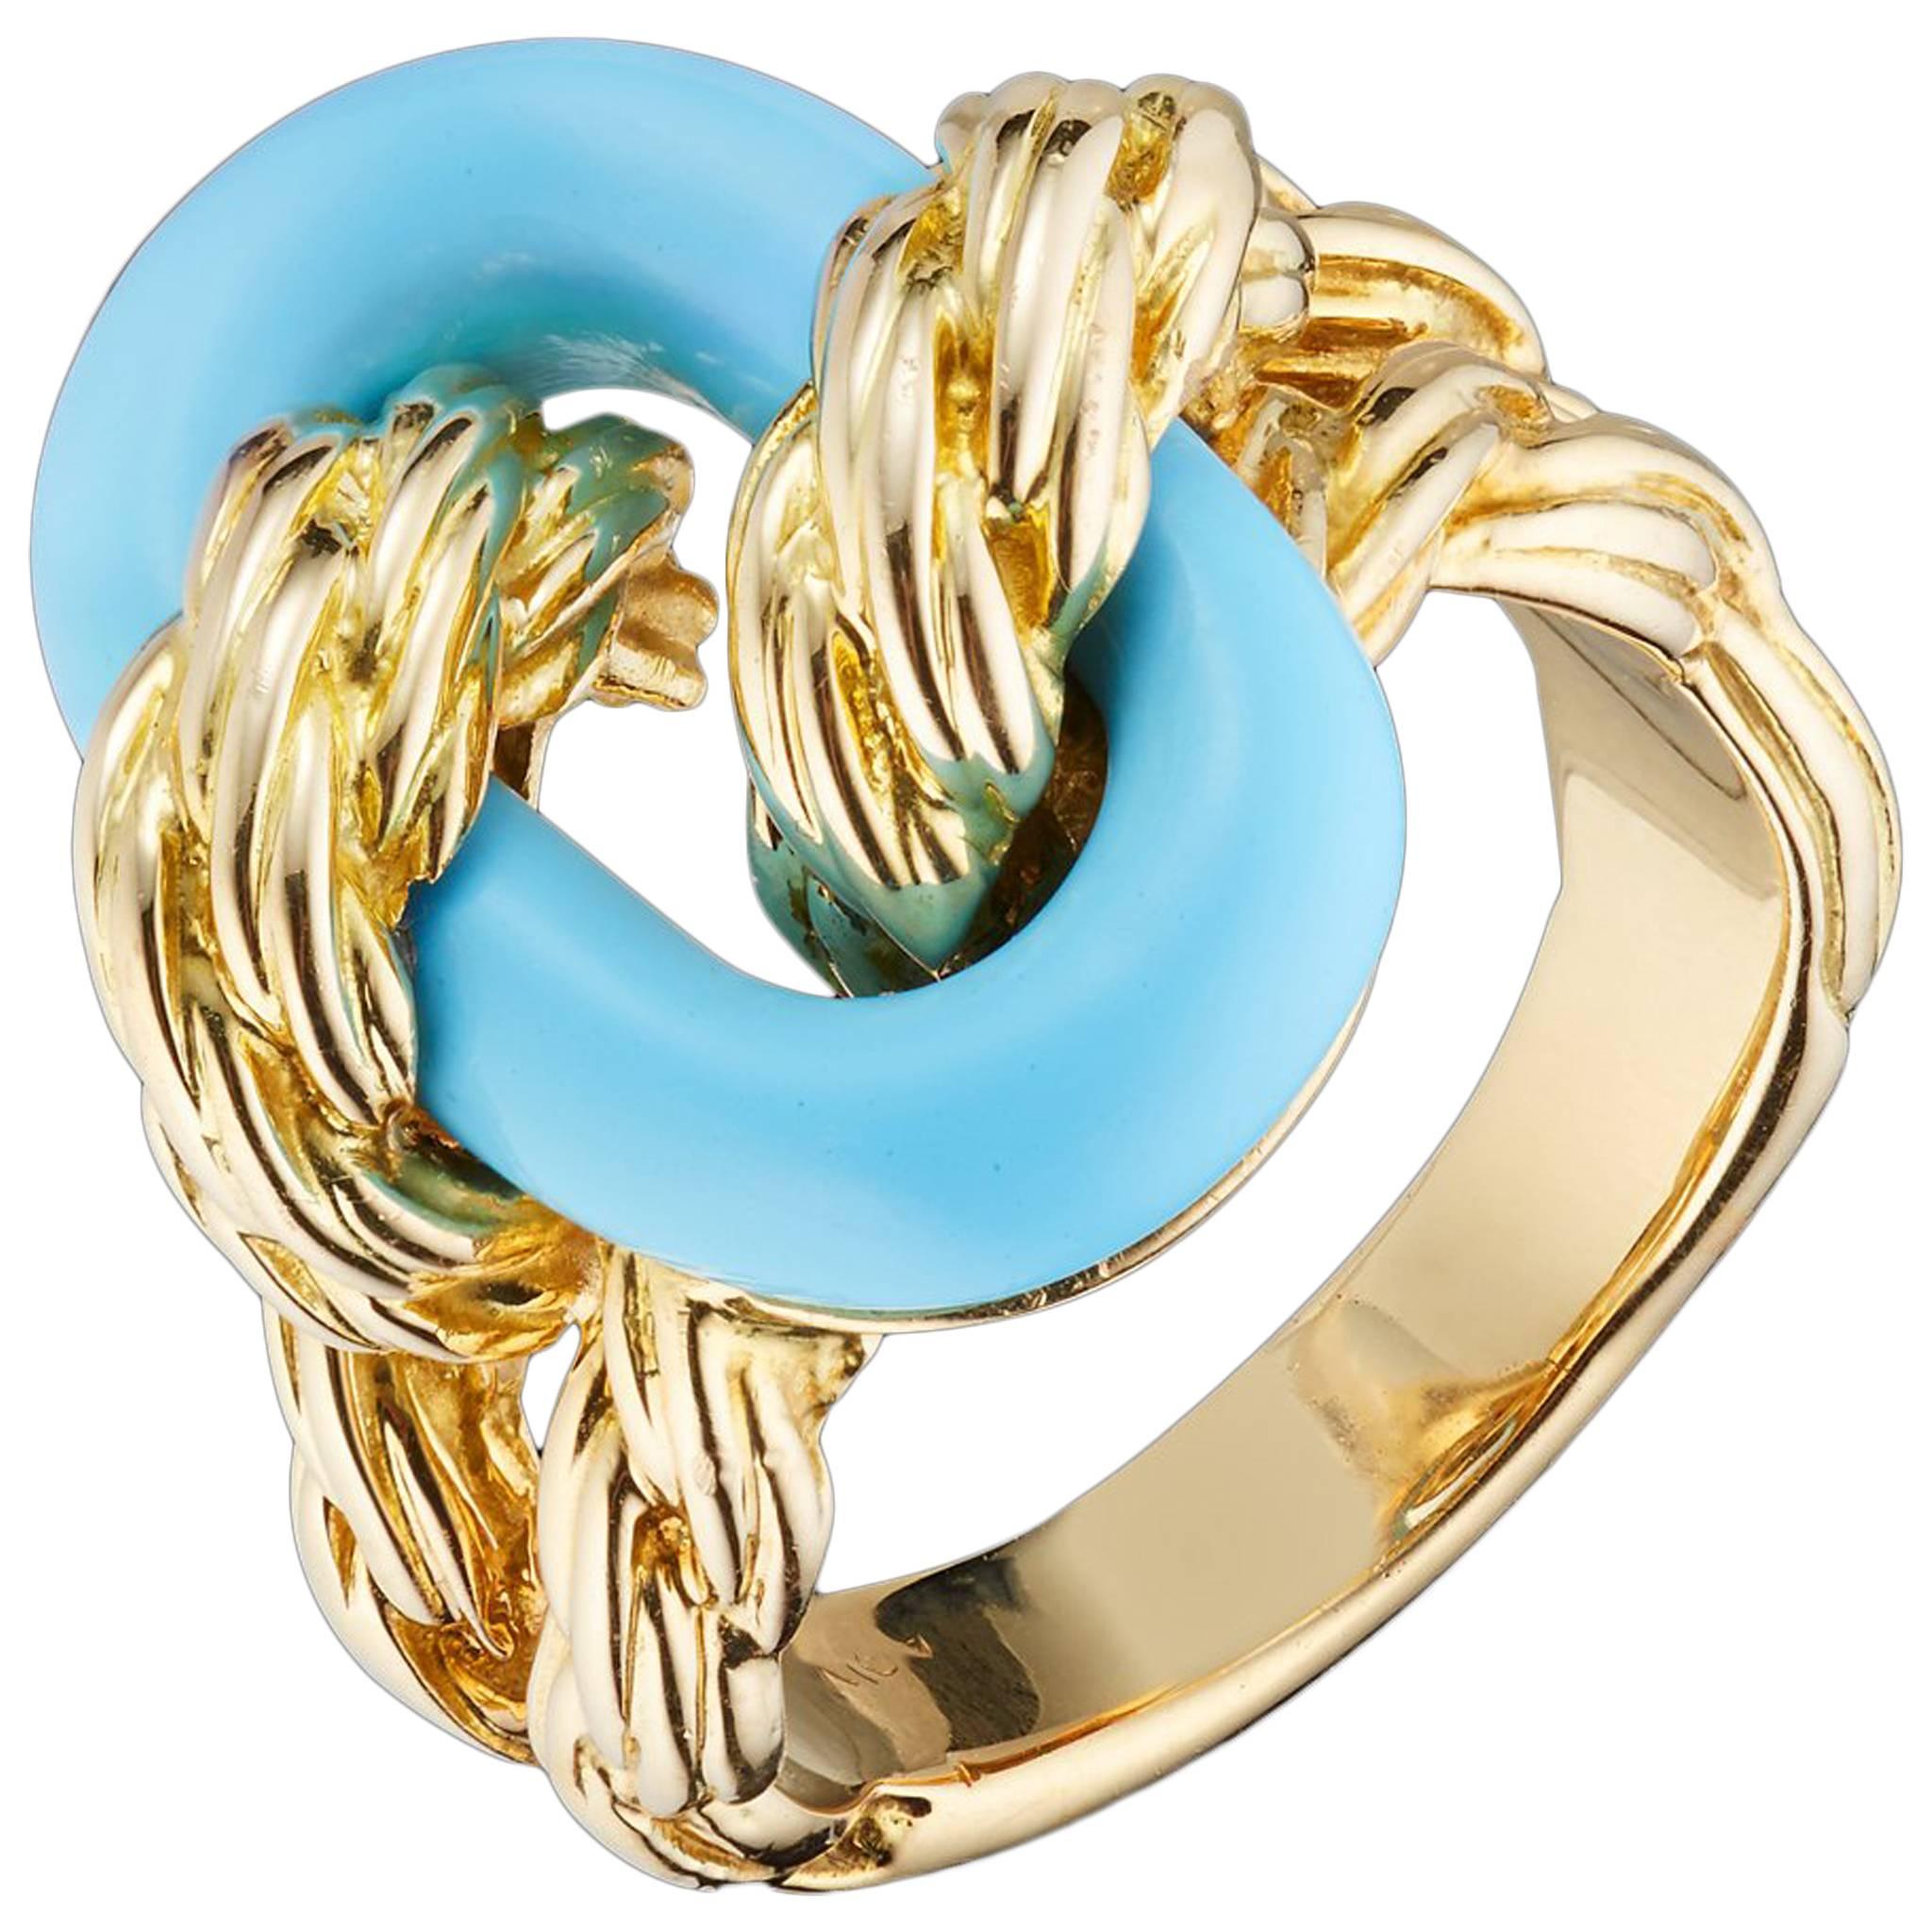 Van Cleef & Arpels 1960s Ring in Turquoise and 18 Karat Yellow Gold